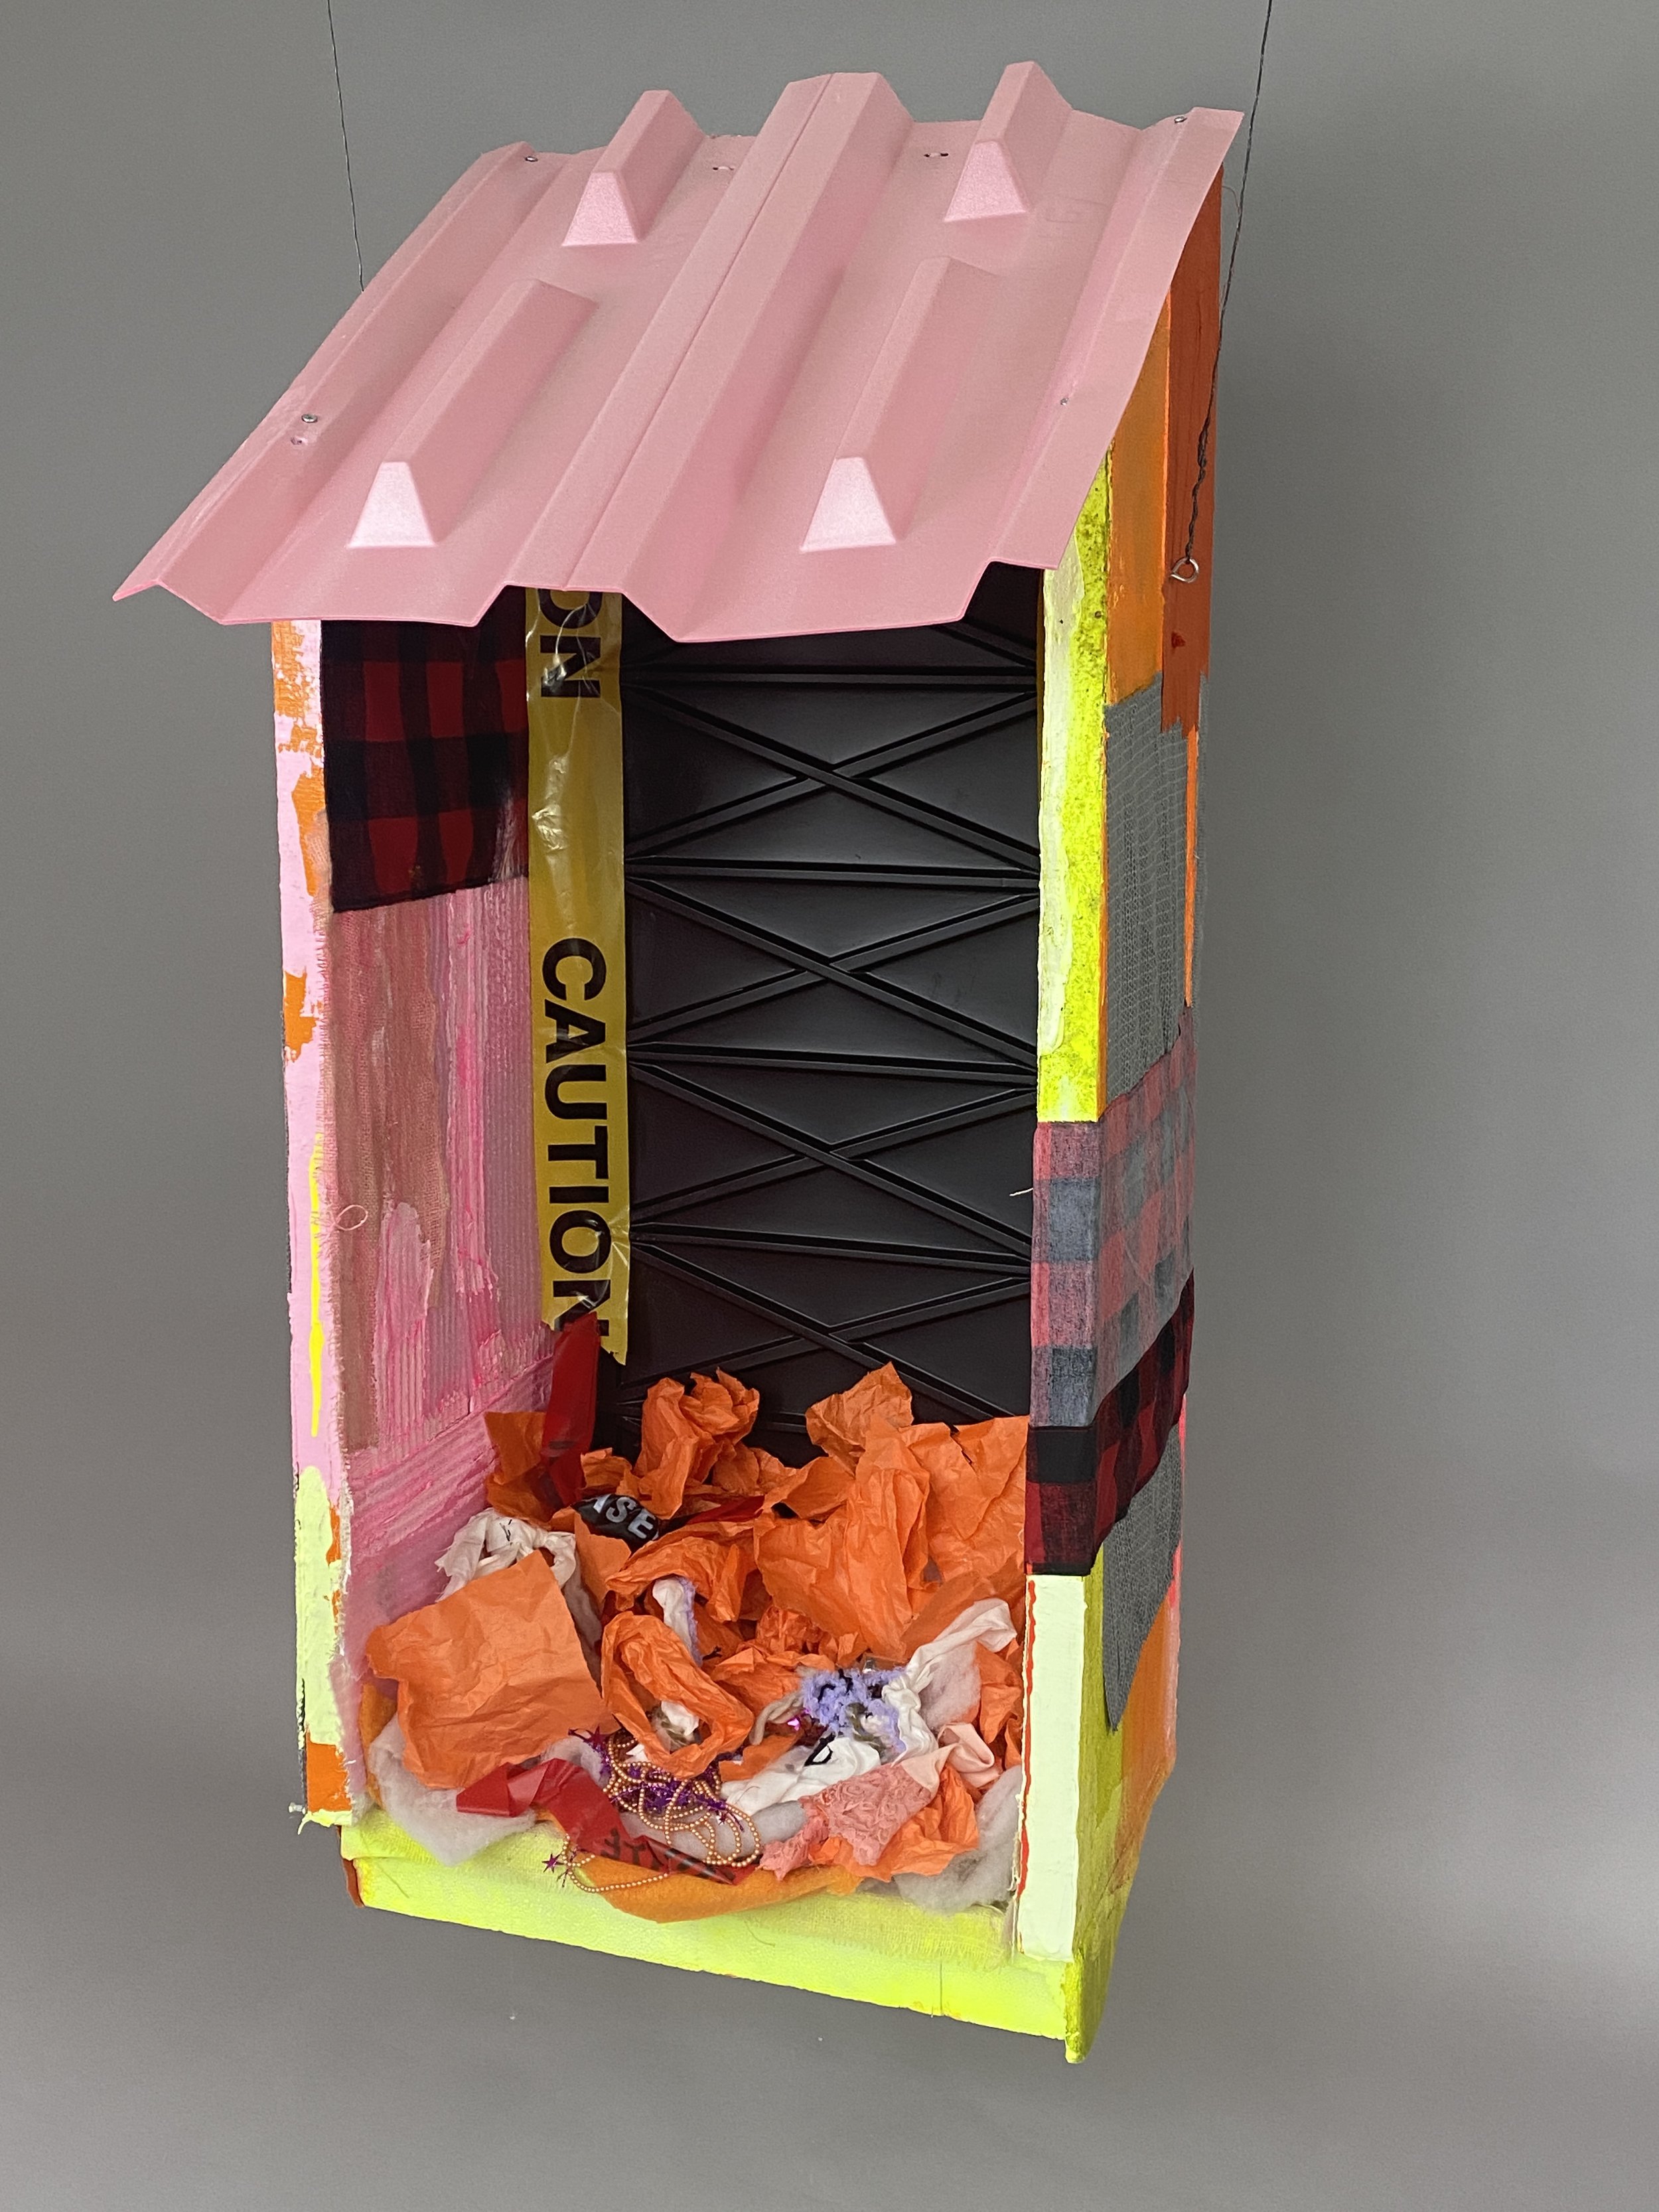    Hideout    Mixed Media, 52 x 24 x 21 inches 